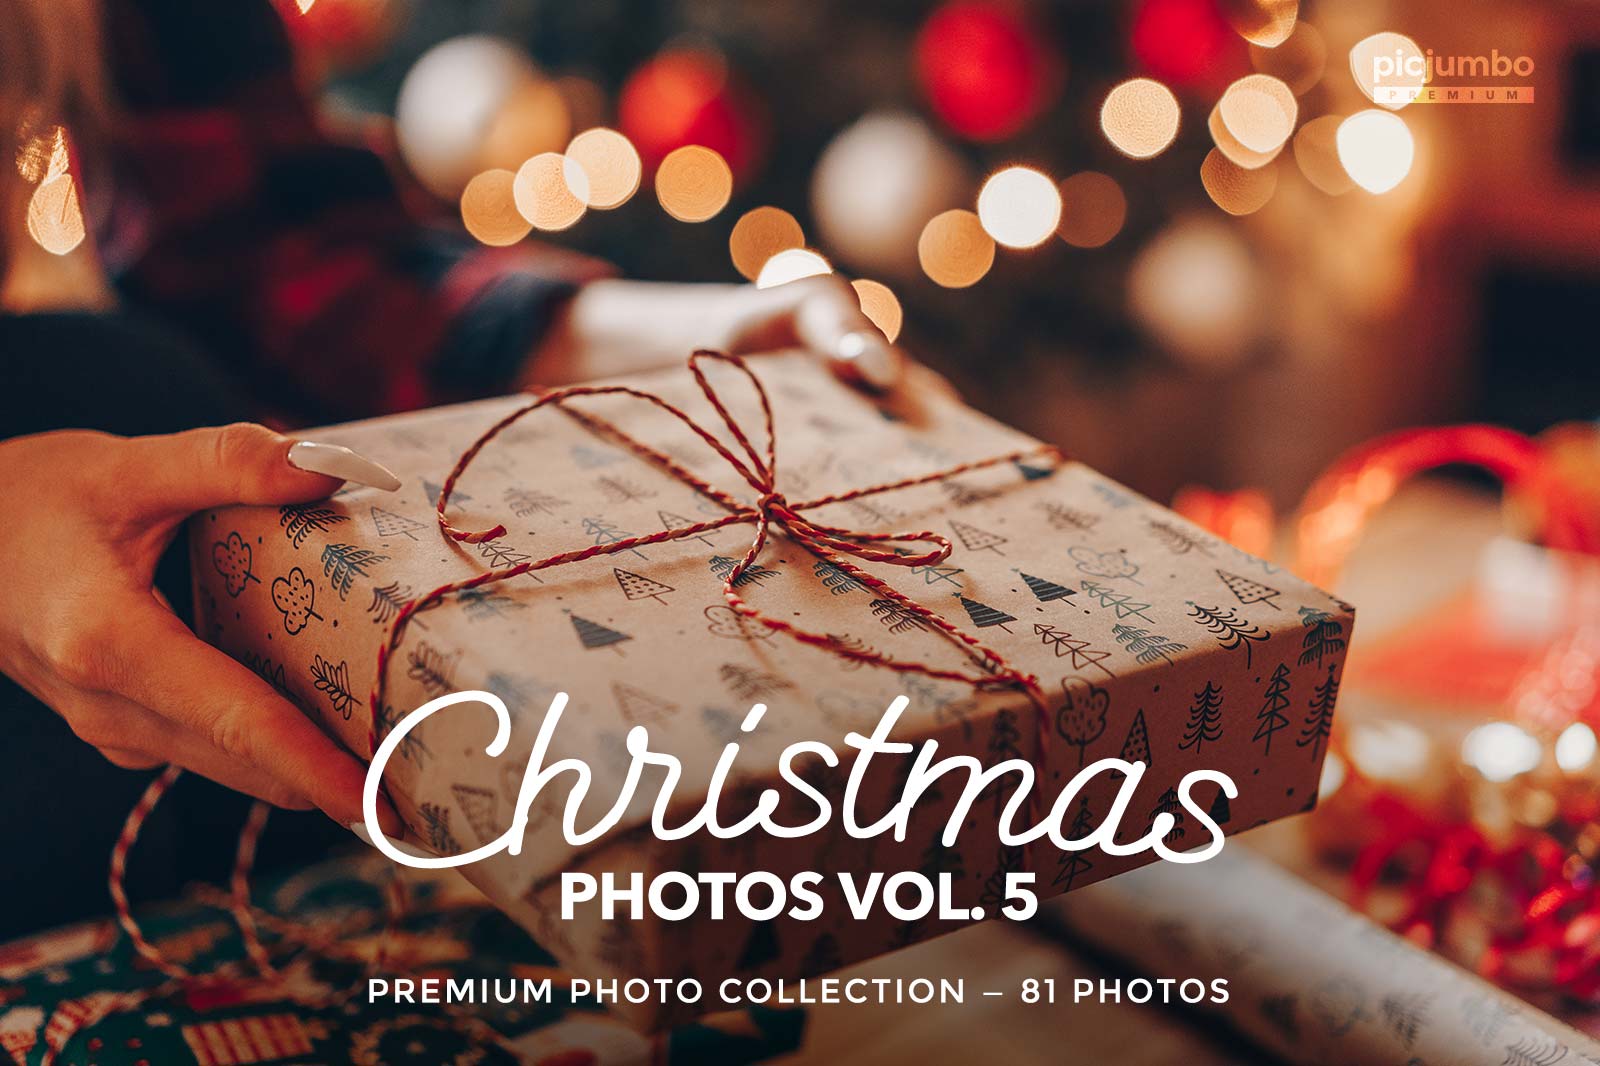 Download hi-res stock photos from our Christmas Photos Vol. 5 PREMIUM Collection!